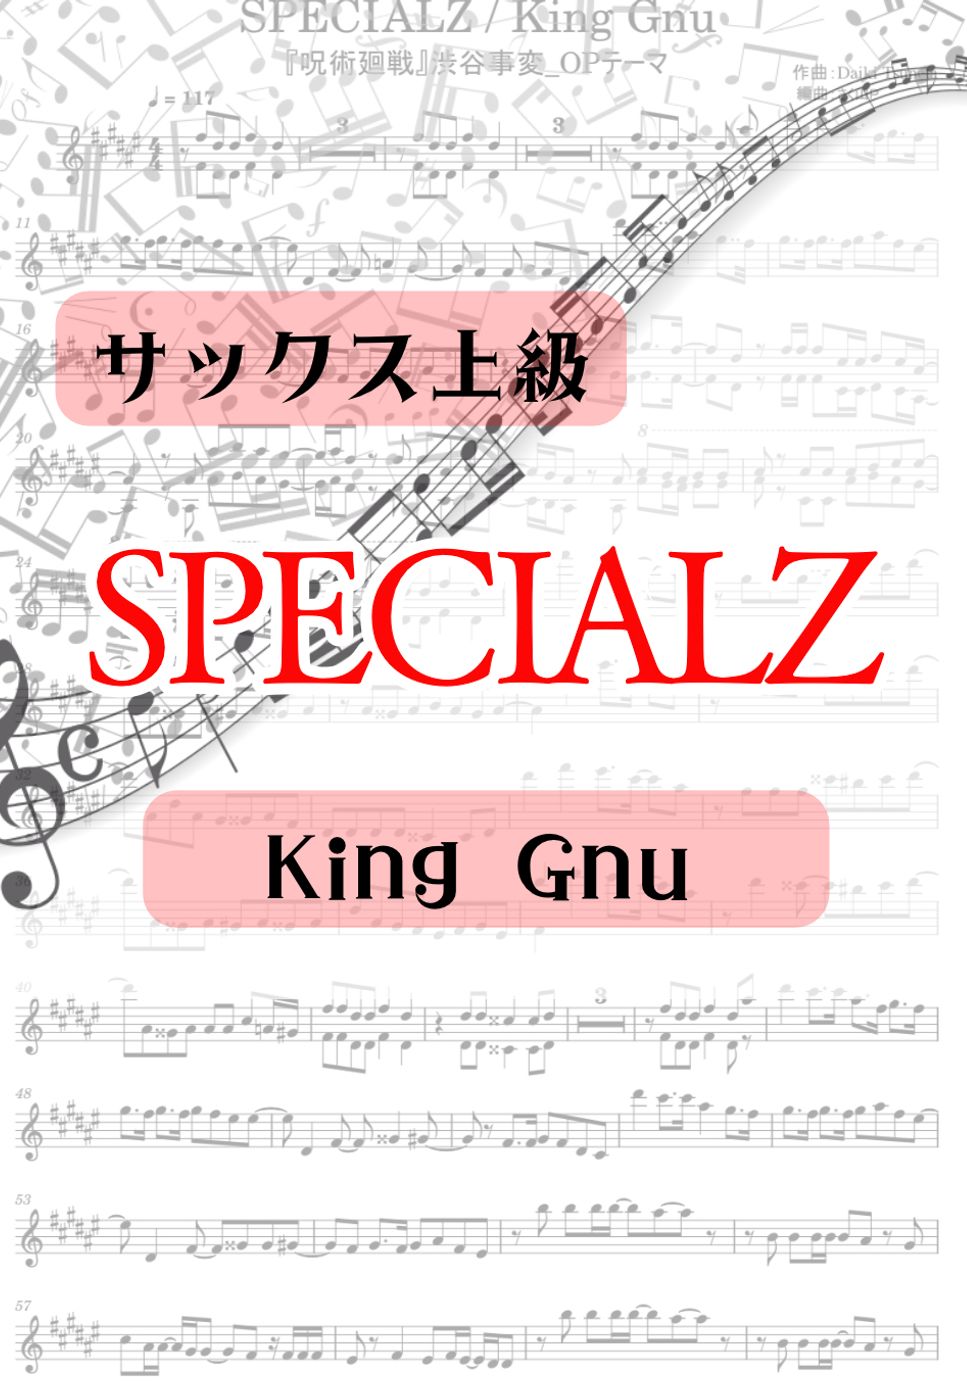 King Gnu - 【inE♭】SPECIALZ_呪術廻戦OP (inE♭/ソロ/デュオ/呪術廻戦) by さく山Ｐ